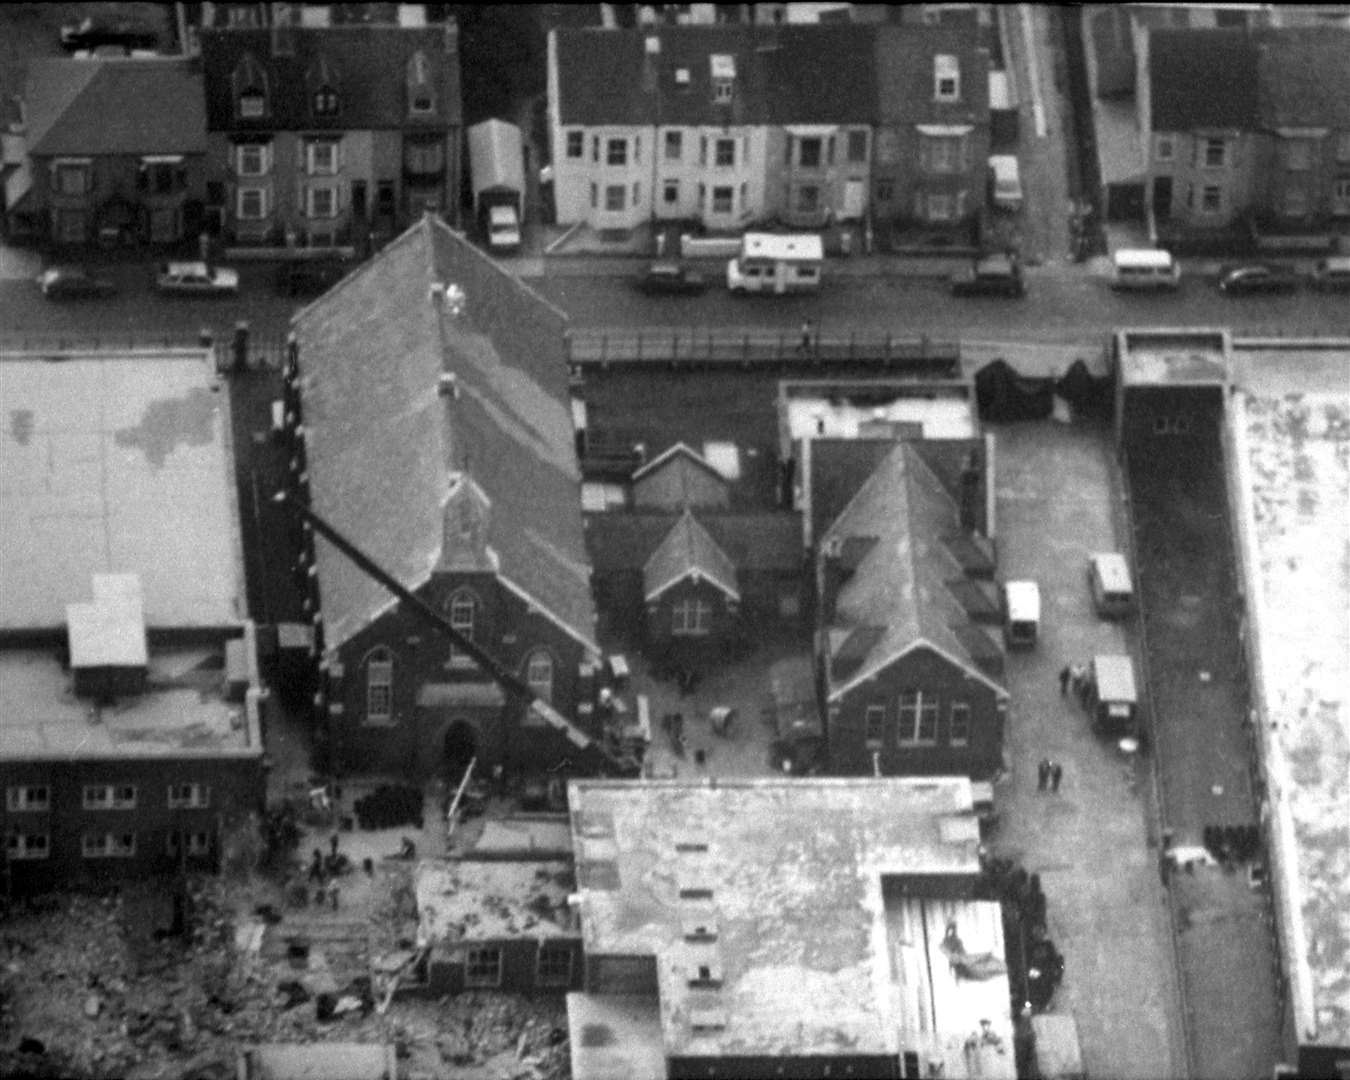 Scene from the air taken by Basil Kidd Deal Bombing